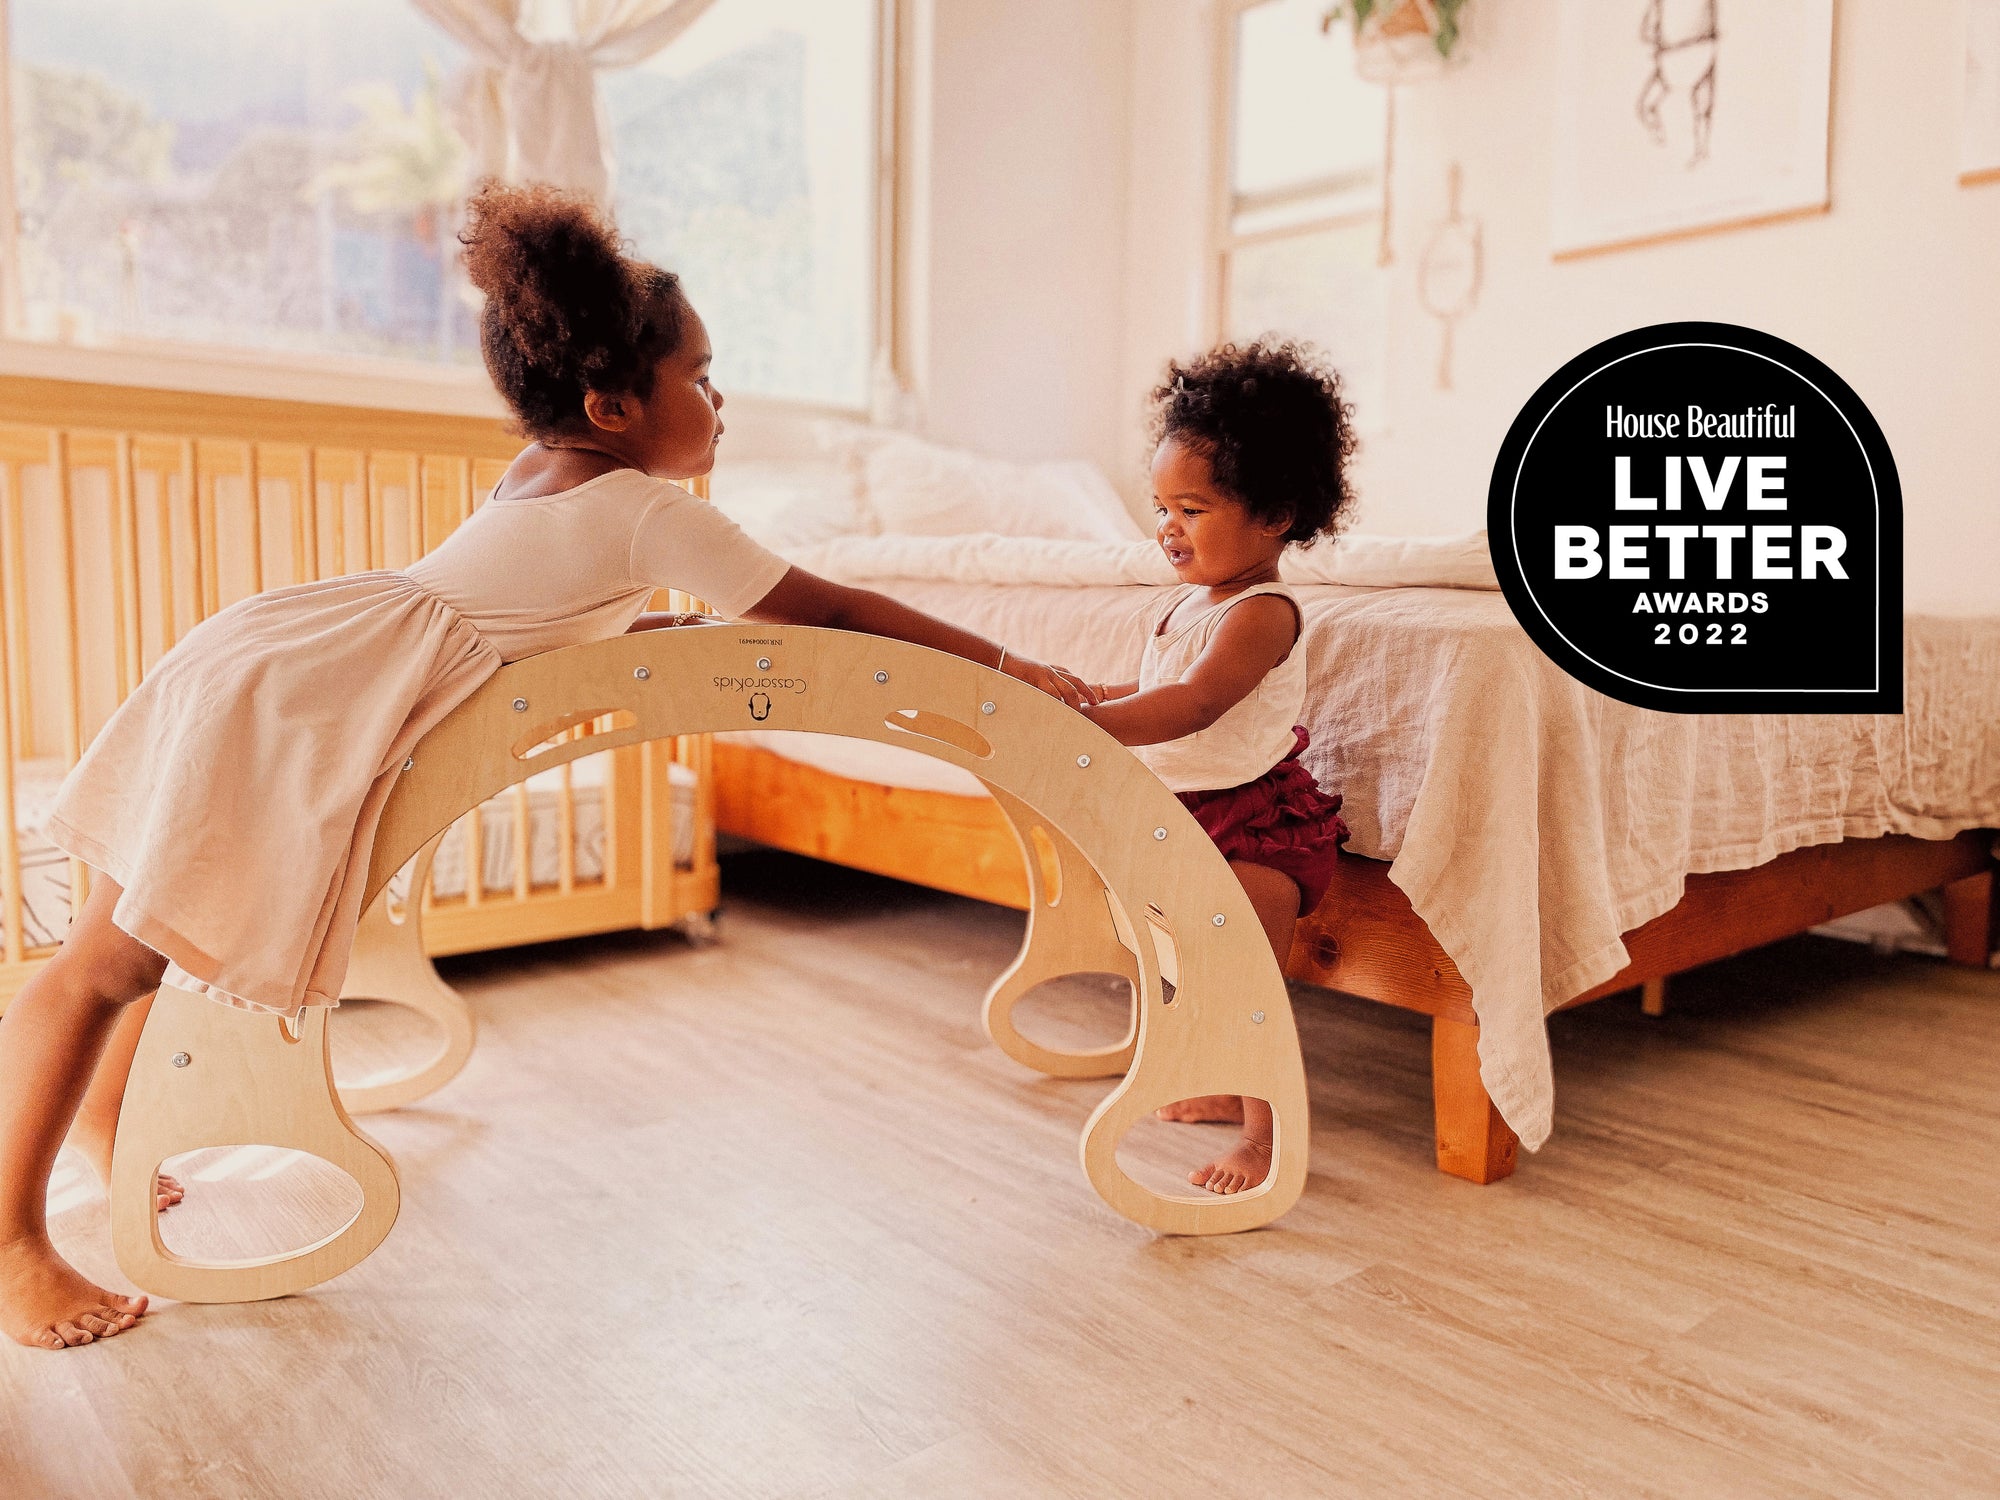 Mommy Must-Have: Cassarokids, A Line Of Eco-Friendly Indoor Playsets.